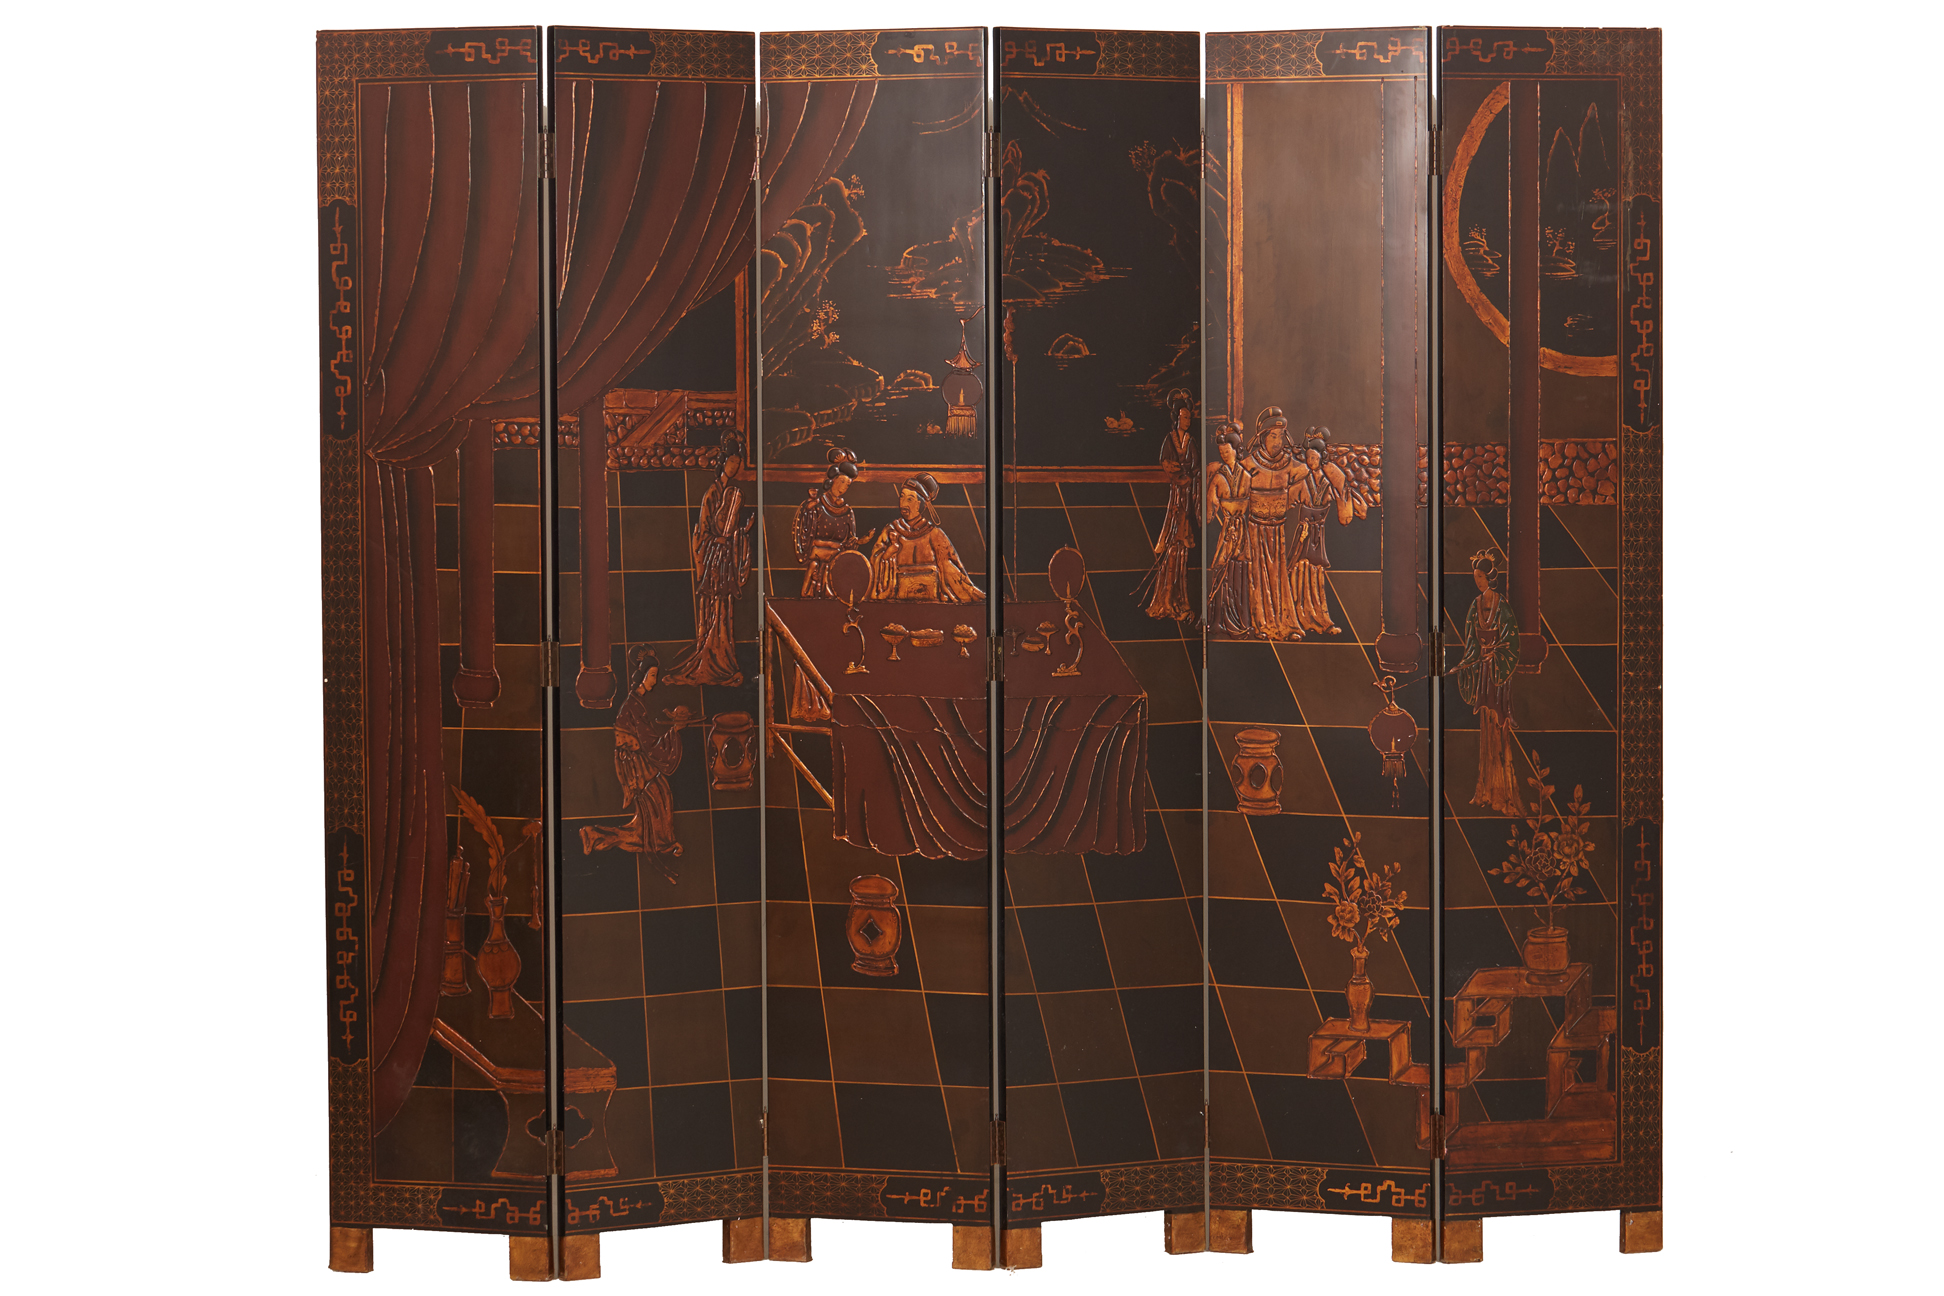 A CHINESE BLACK LACQUERED SCREEN